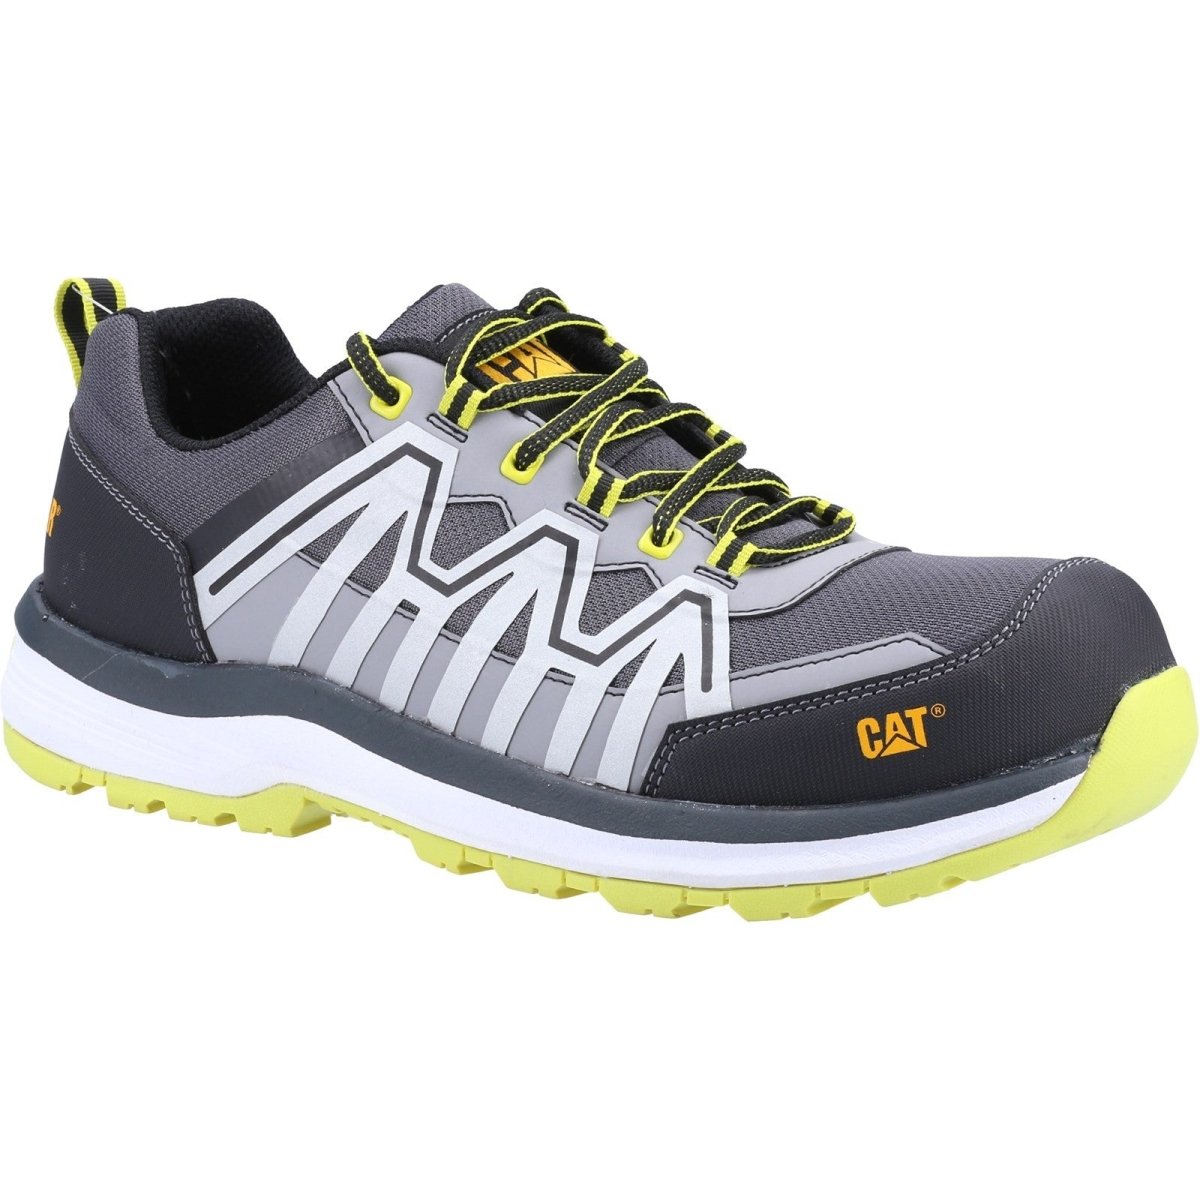 Caterpillar Charge S3 Composite Toe Mens Safety Trainers - Shoe Store Direct